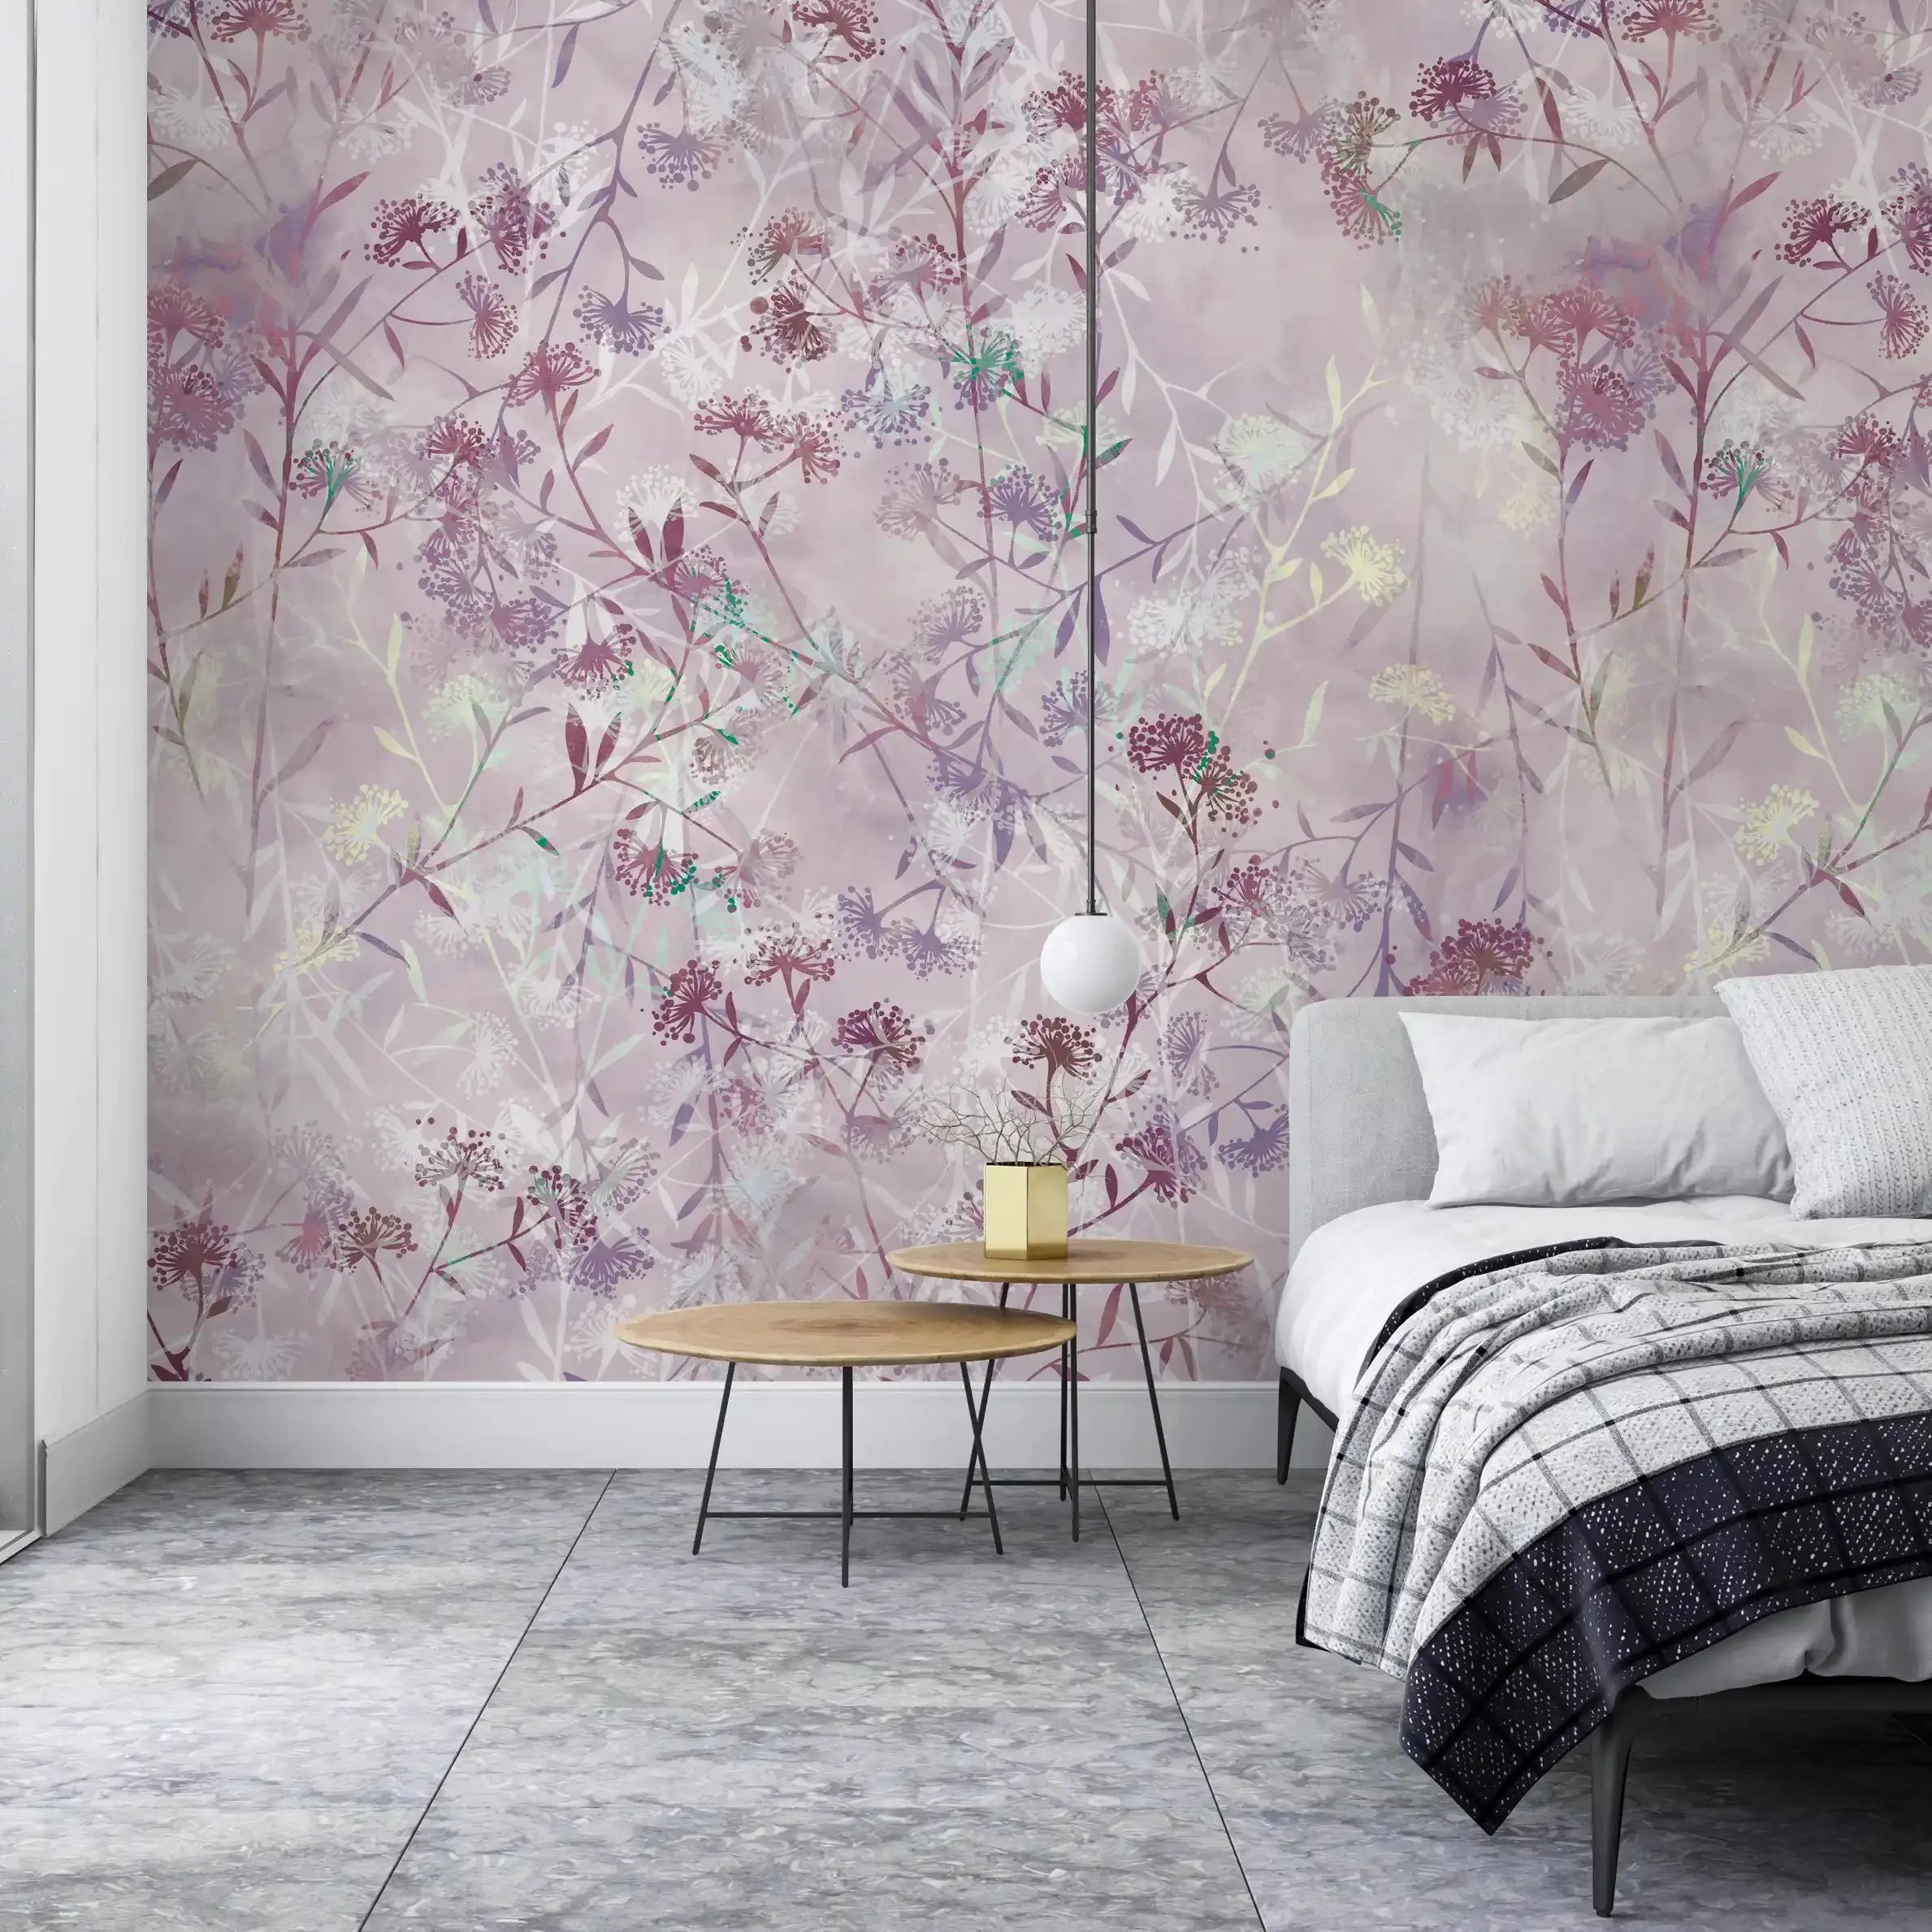 3009-C / Wild Floral Wall Mural - Purple Patterned Peel and Stick Wallpaper for Bedroom and Bathroom - Artevella